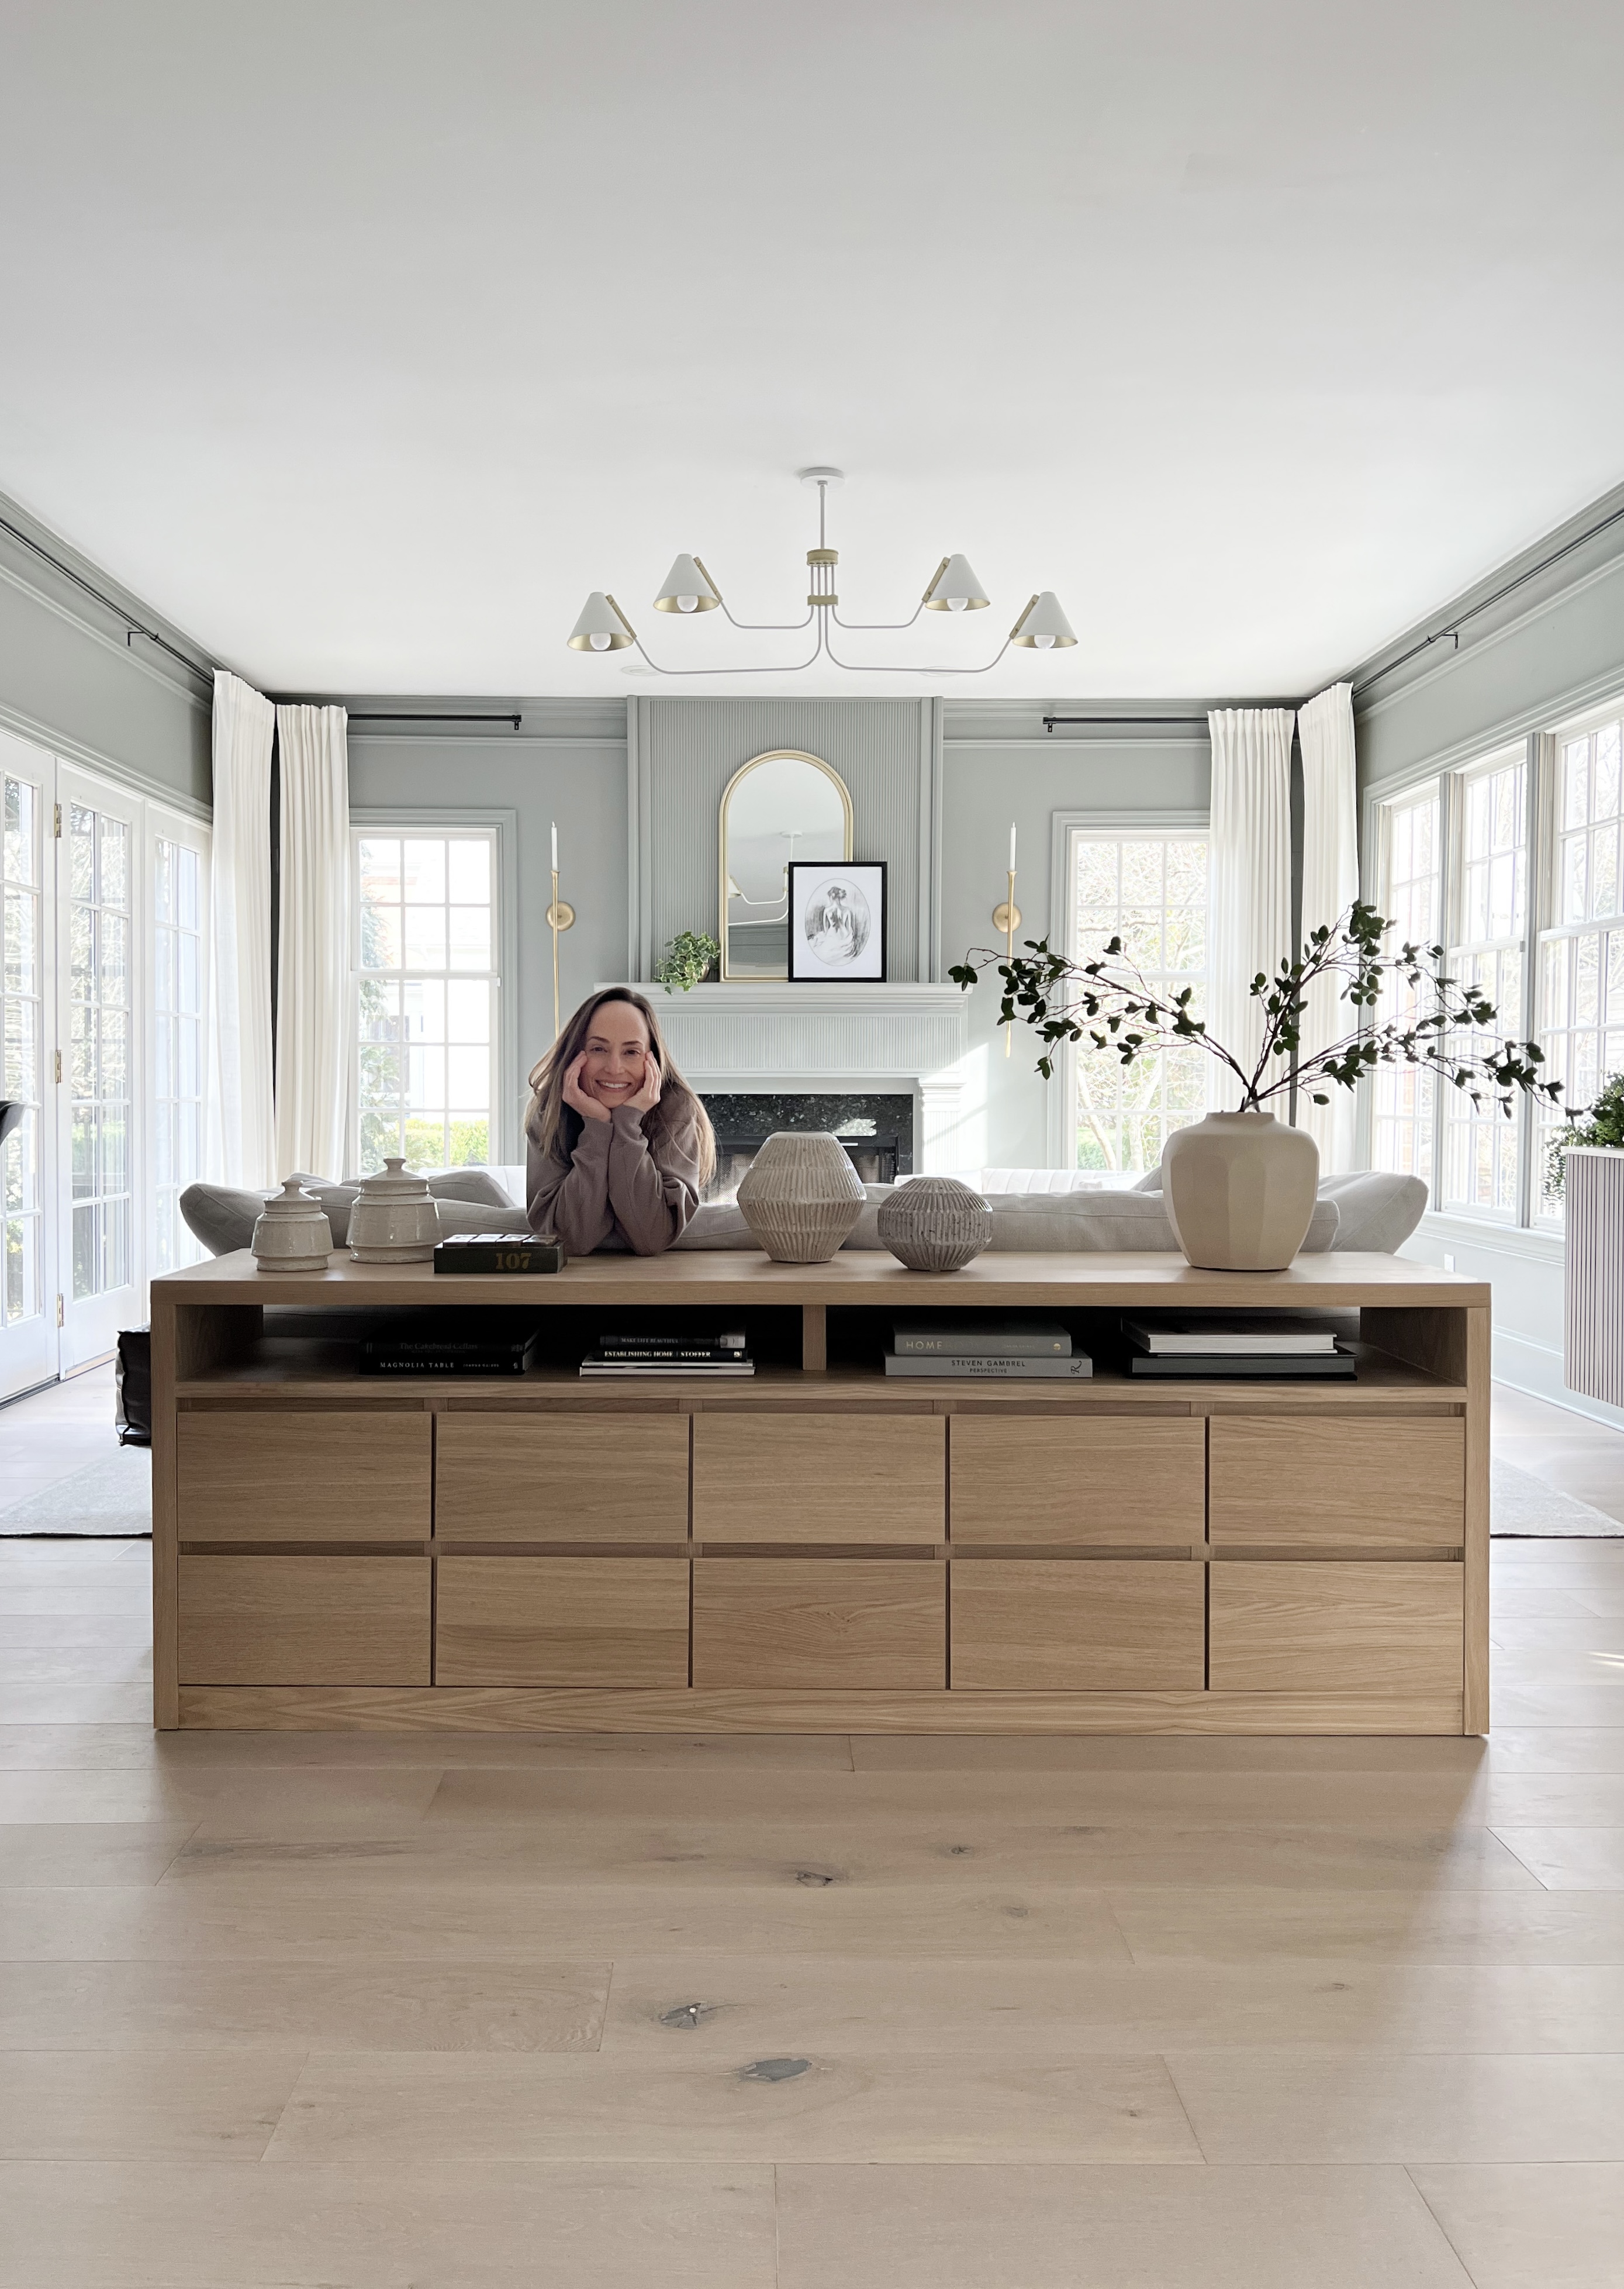 An extra large sofa table in an airy living room, with a woman behind it. The sofa table was created using an IKEA nightstand hack of using MALM nightstands for the drawer portion of the build.